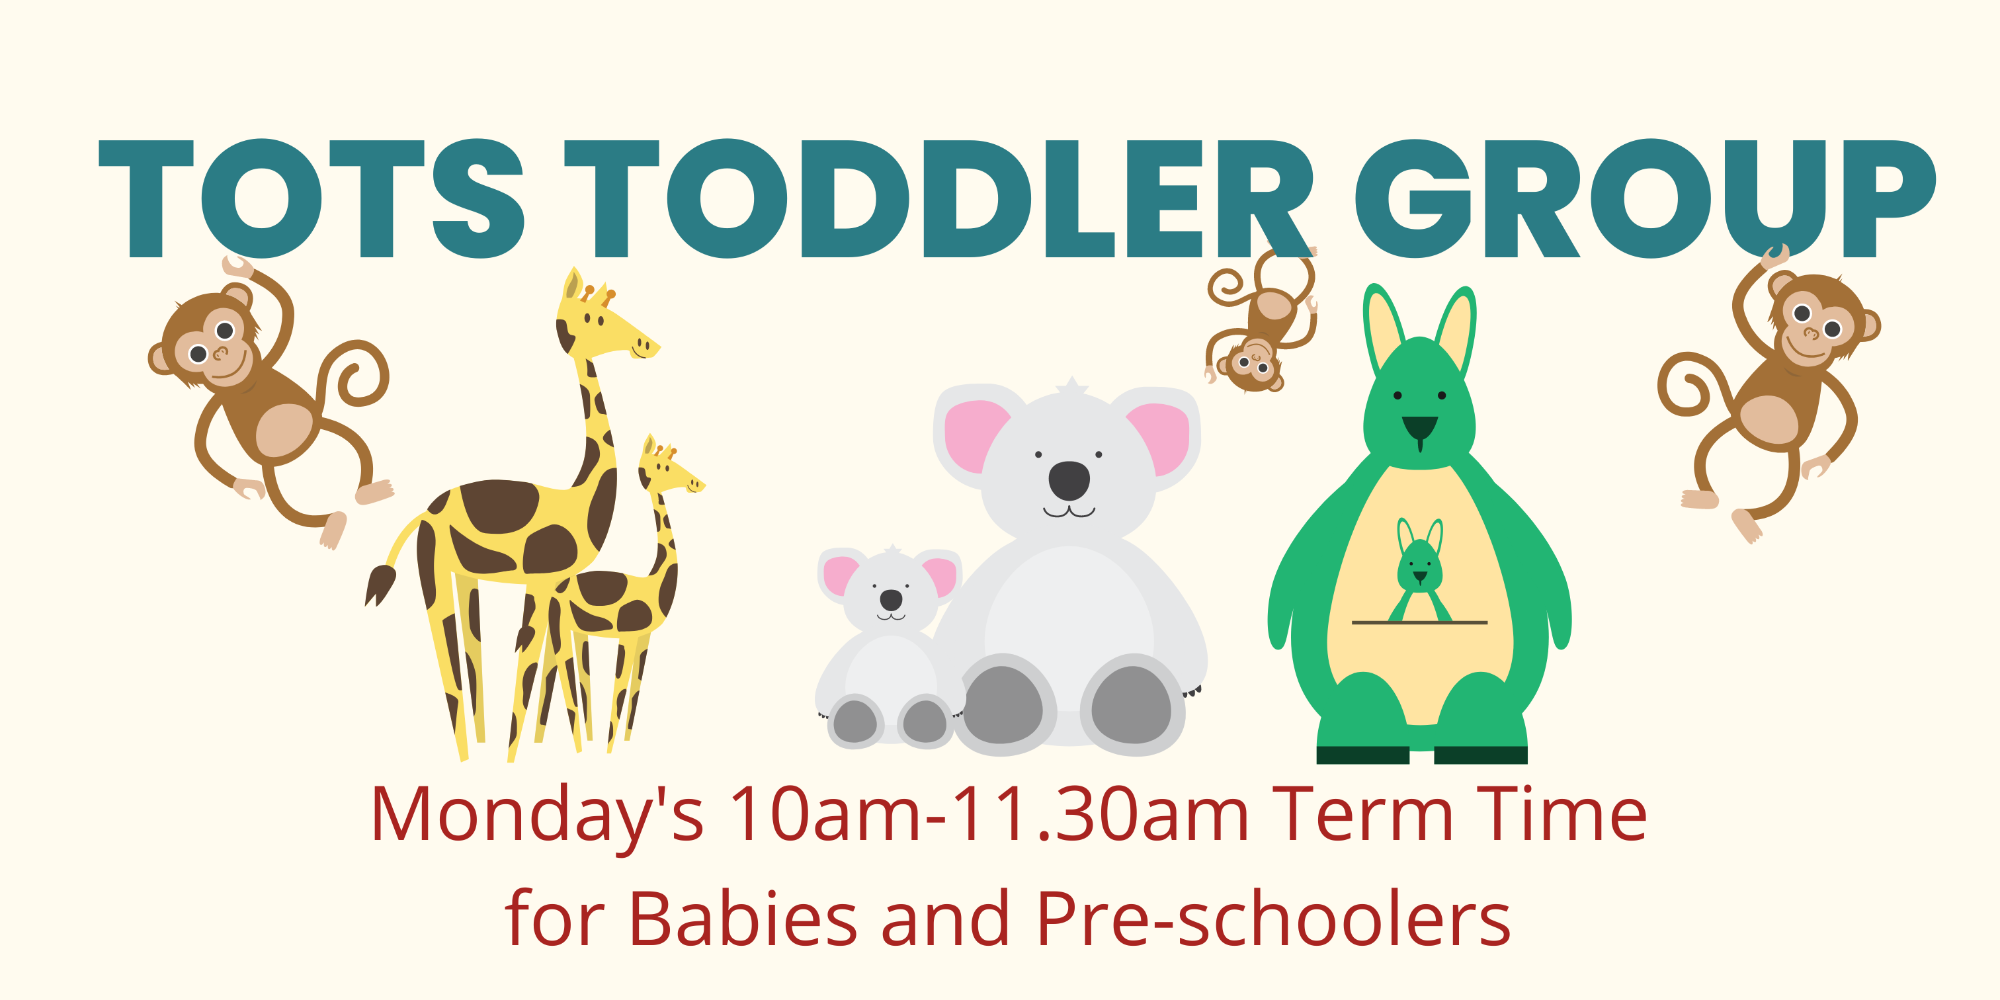 Tots Toddler Group